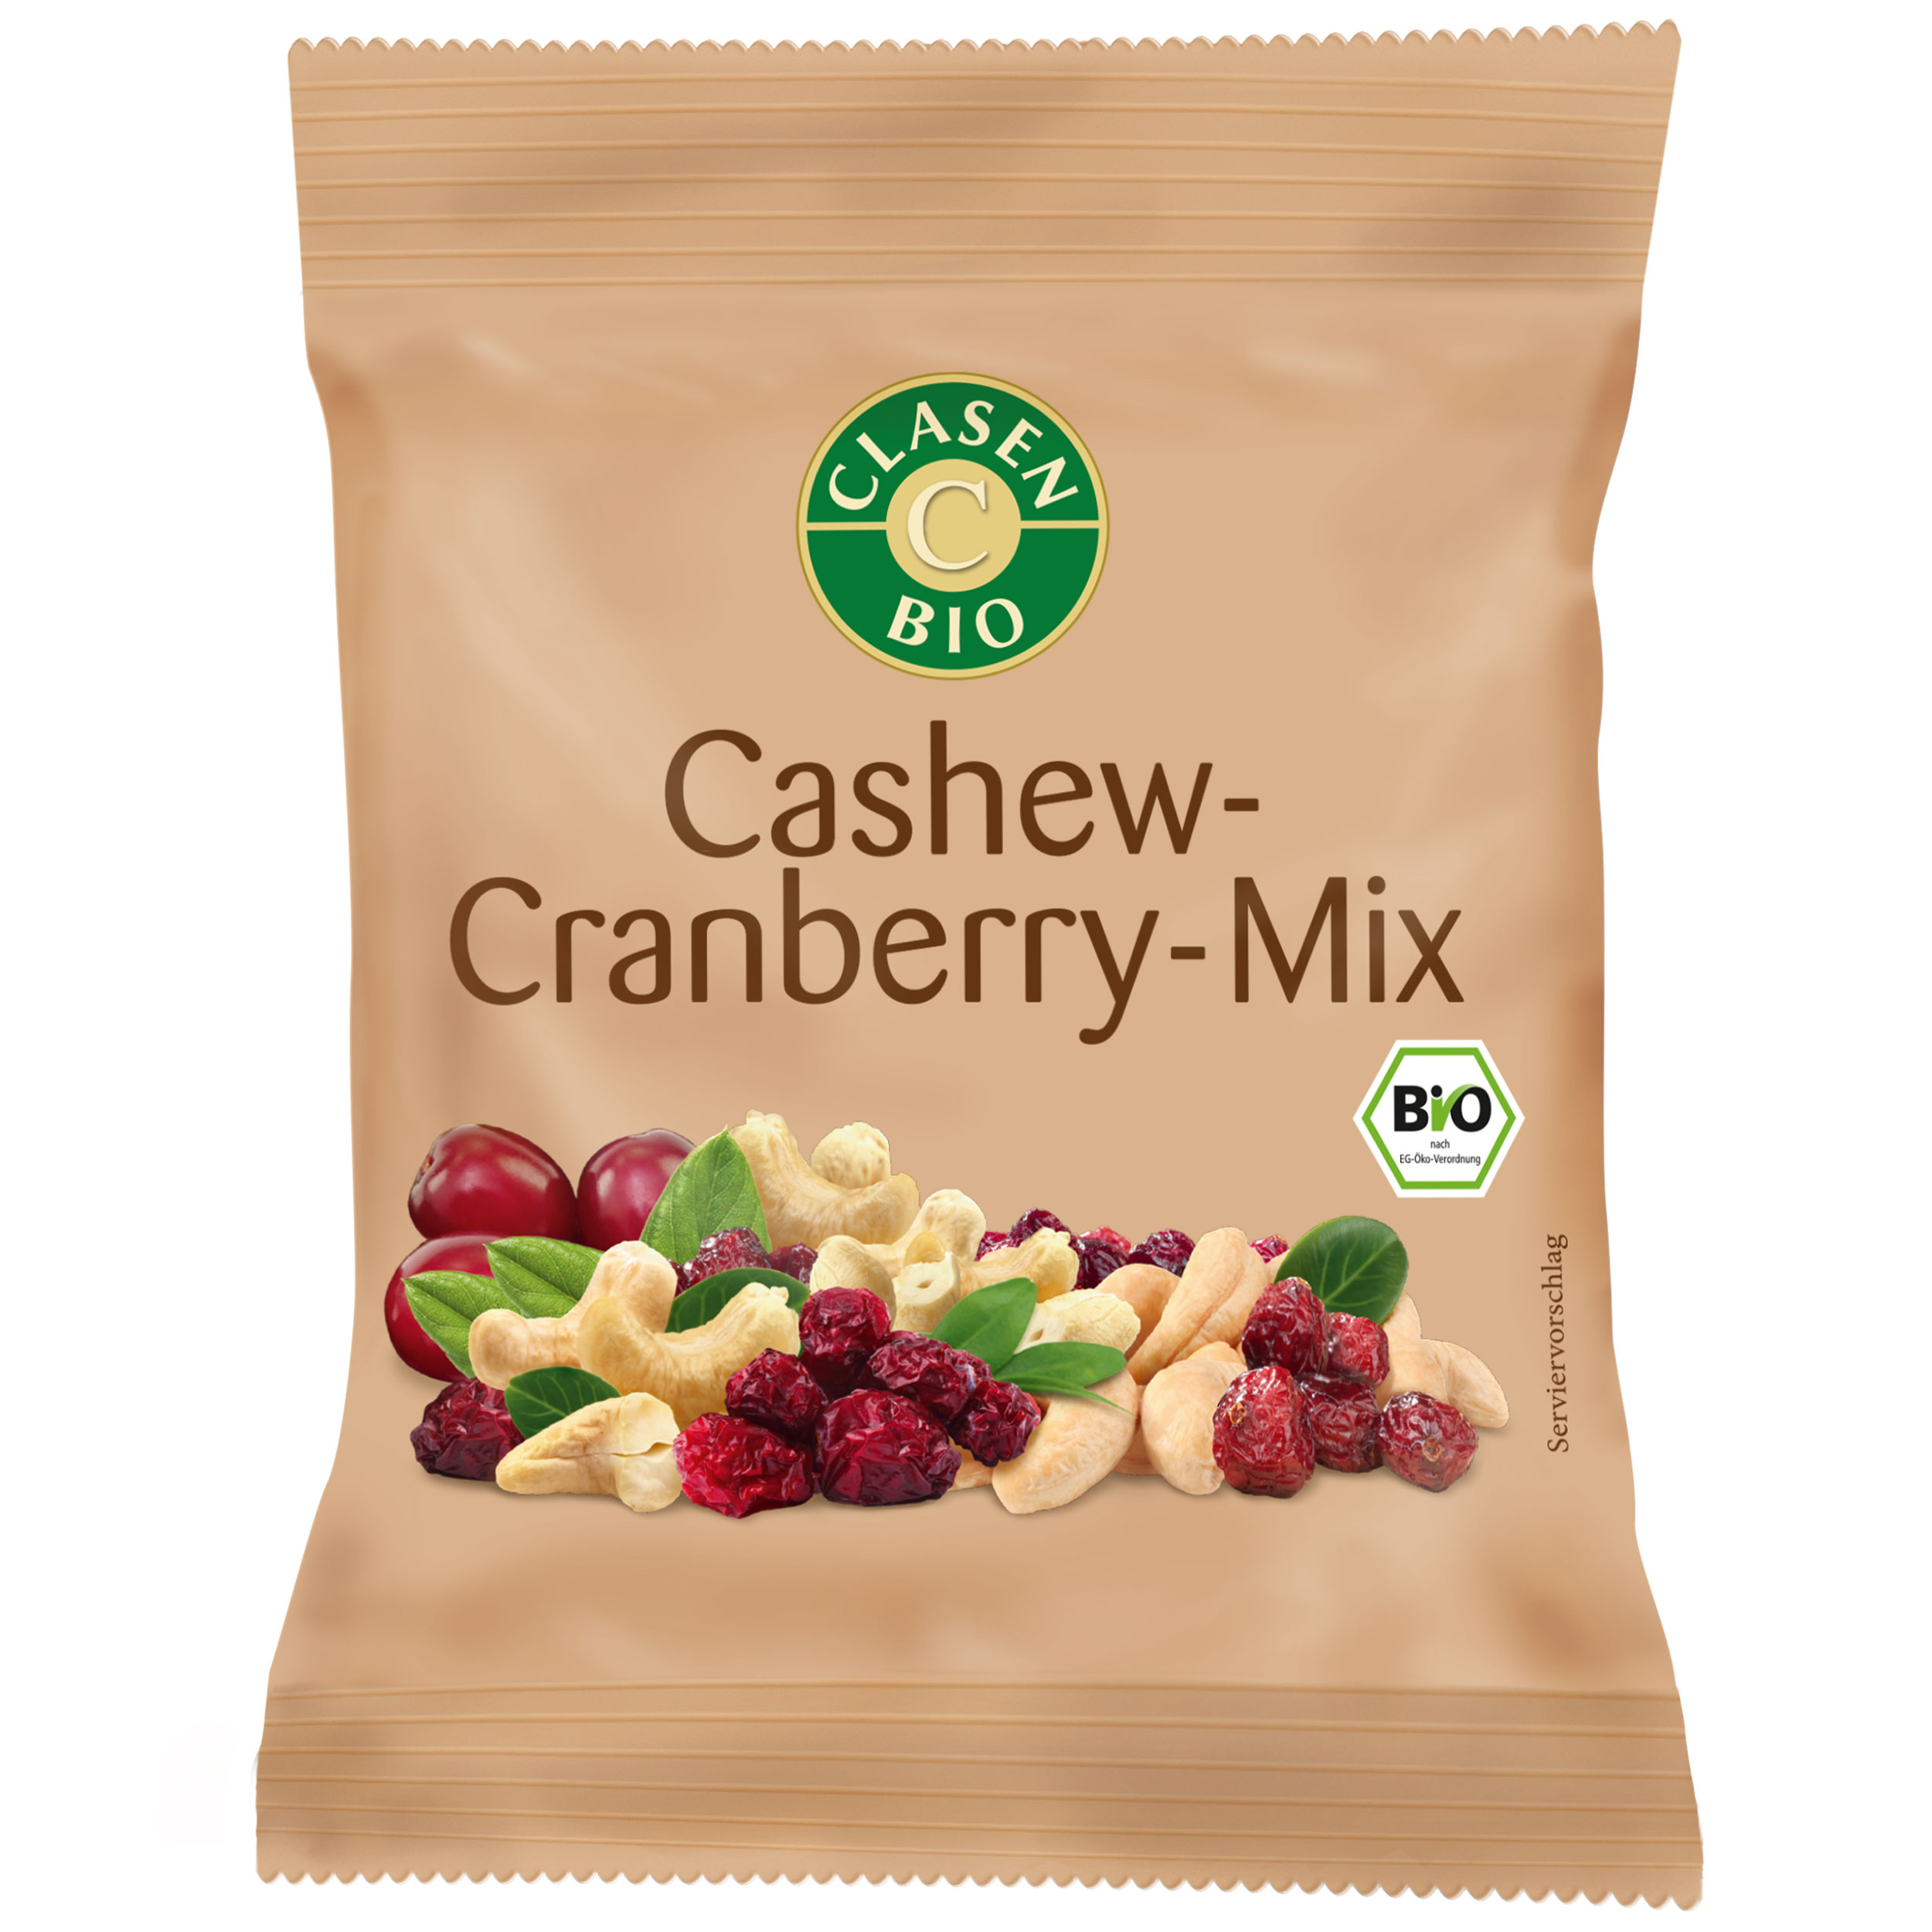 Cashew-Cranberry-Mix Snack Pack